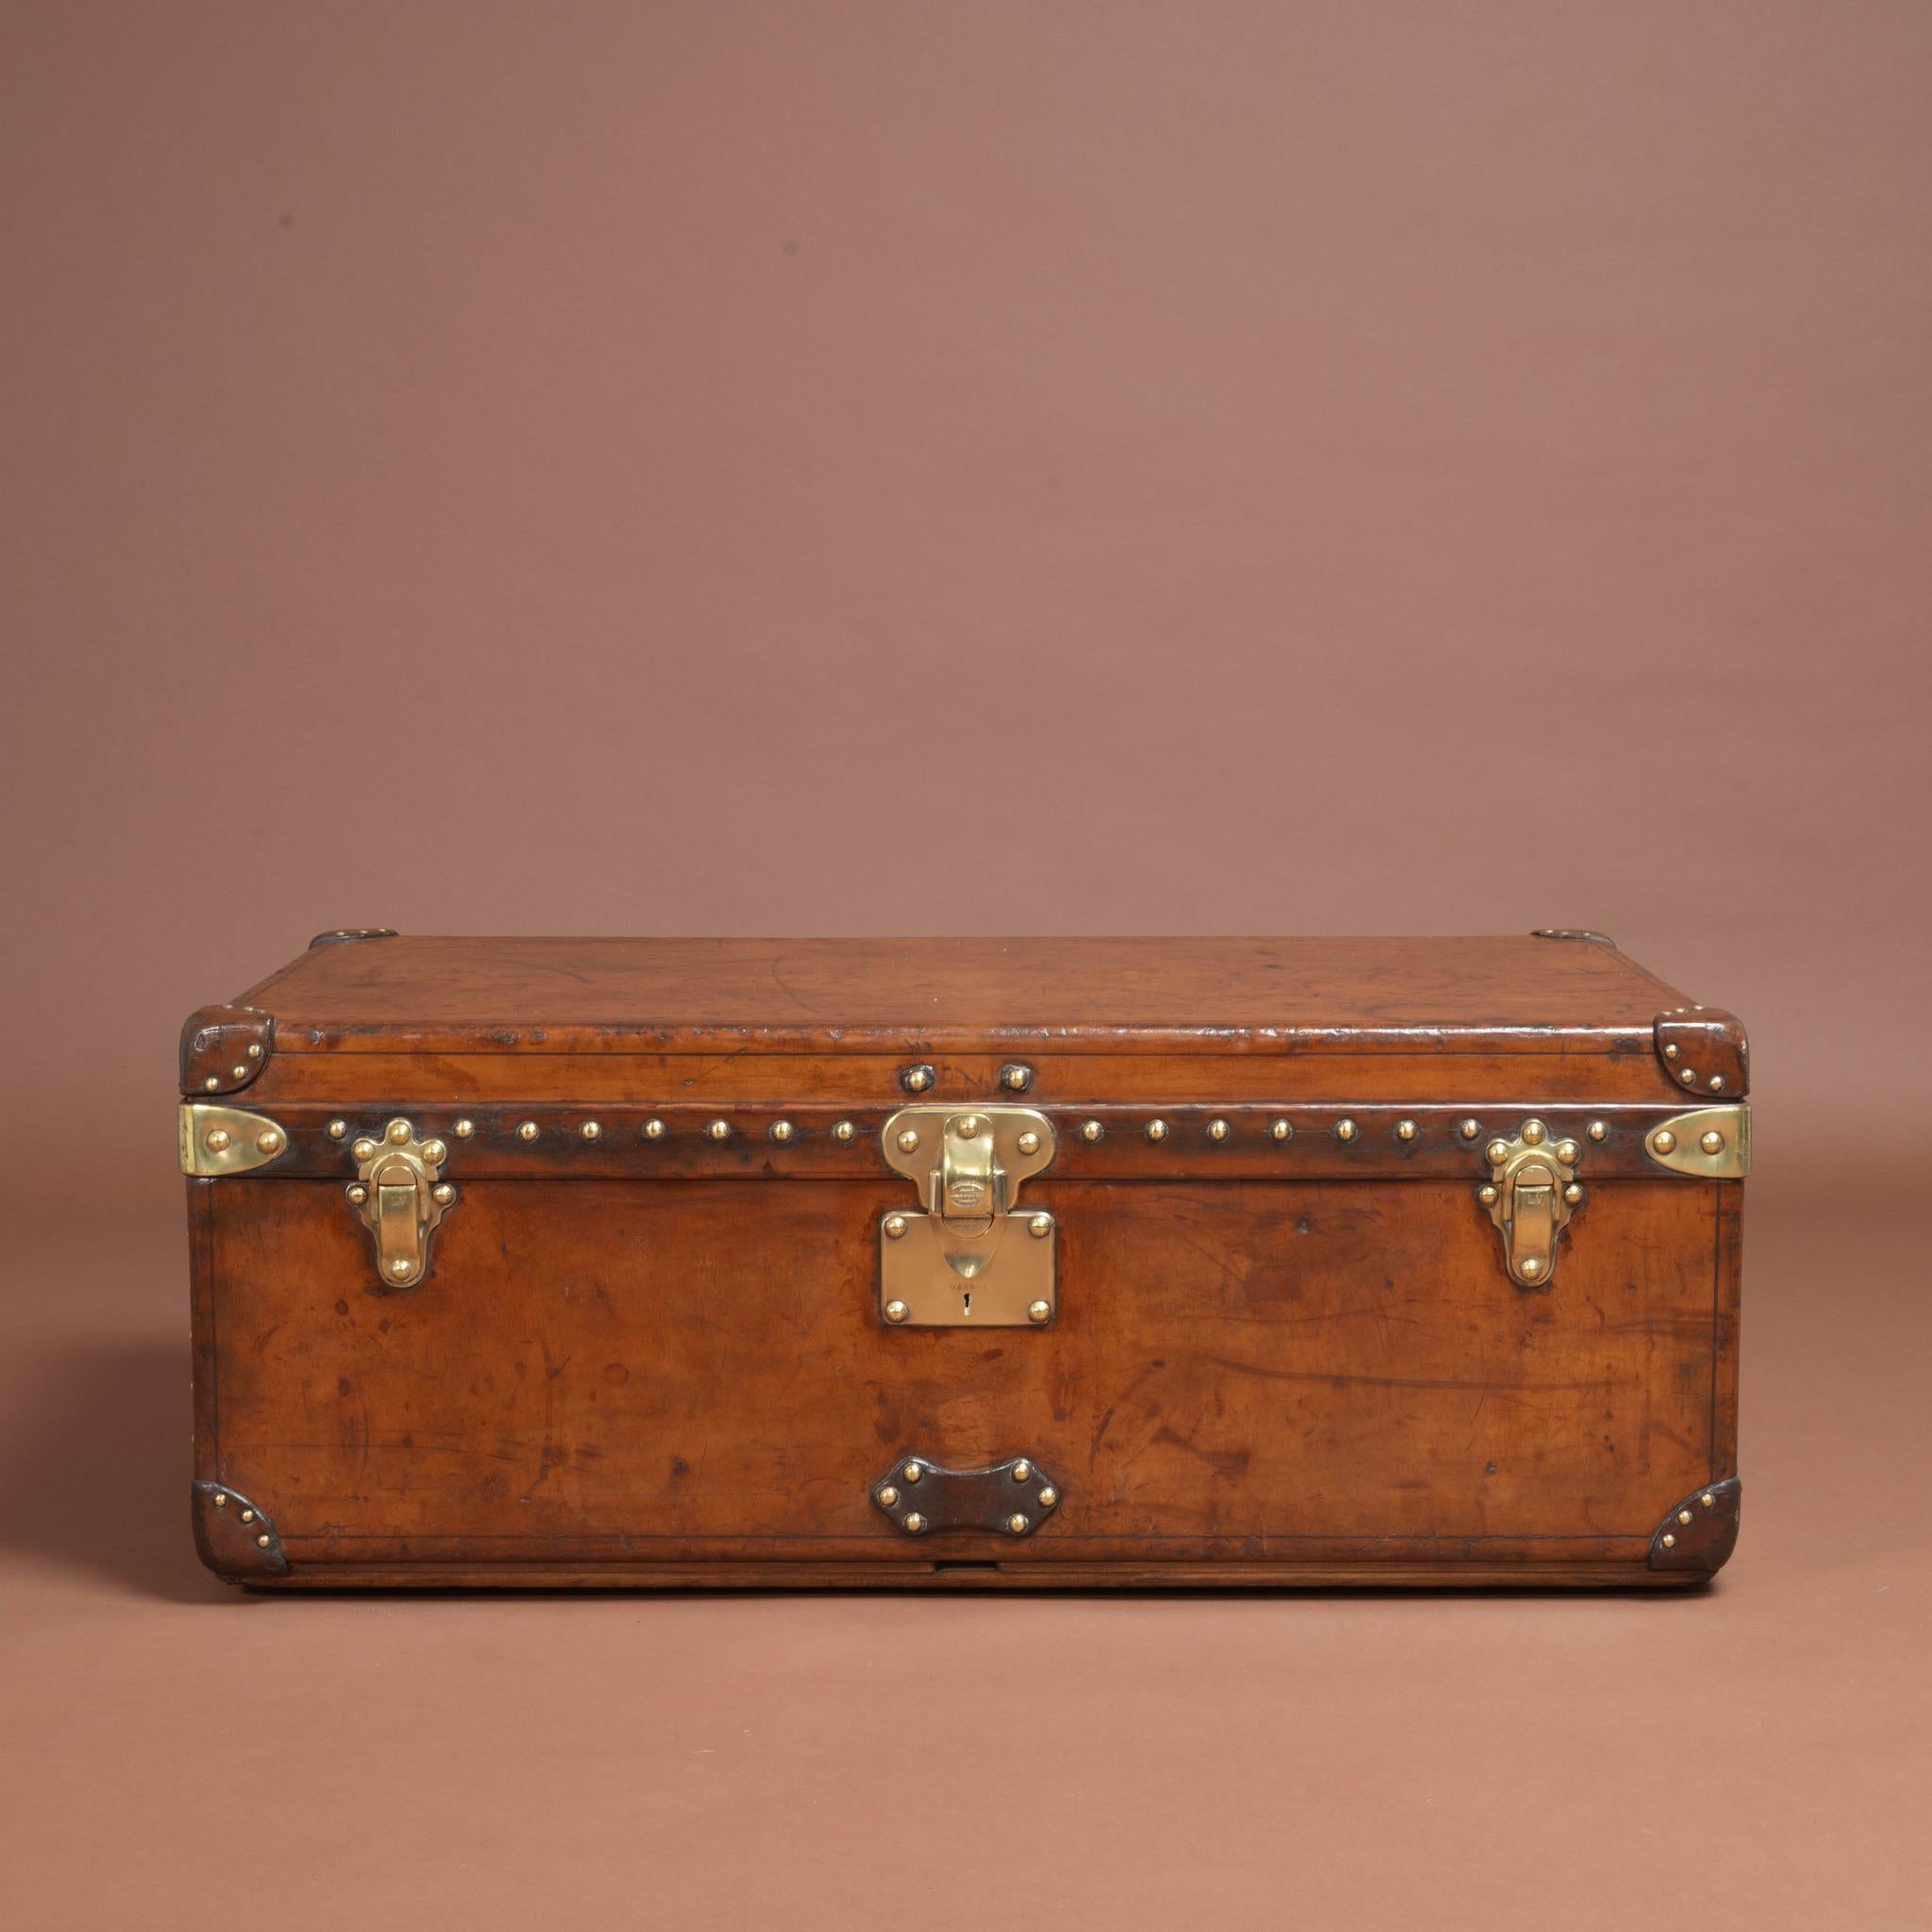 A well proportioned natural leather covered Louis Vuitton cabin trunk that has built up an attractive patina with age. Has original leather handles & brass fittings and has its original interior in-tact (including the original tray); Circa 1930. One